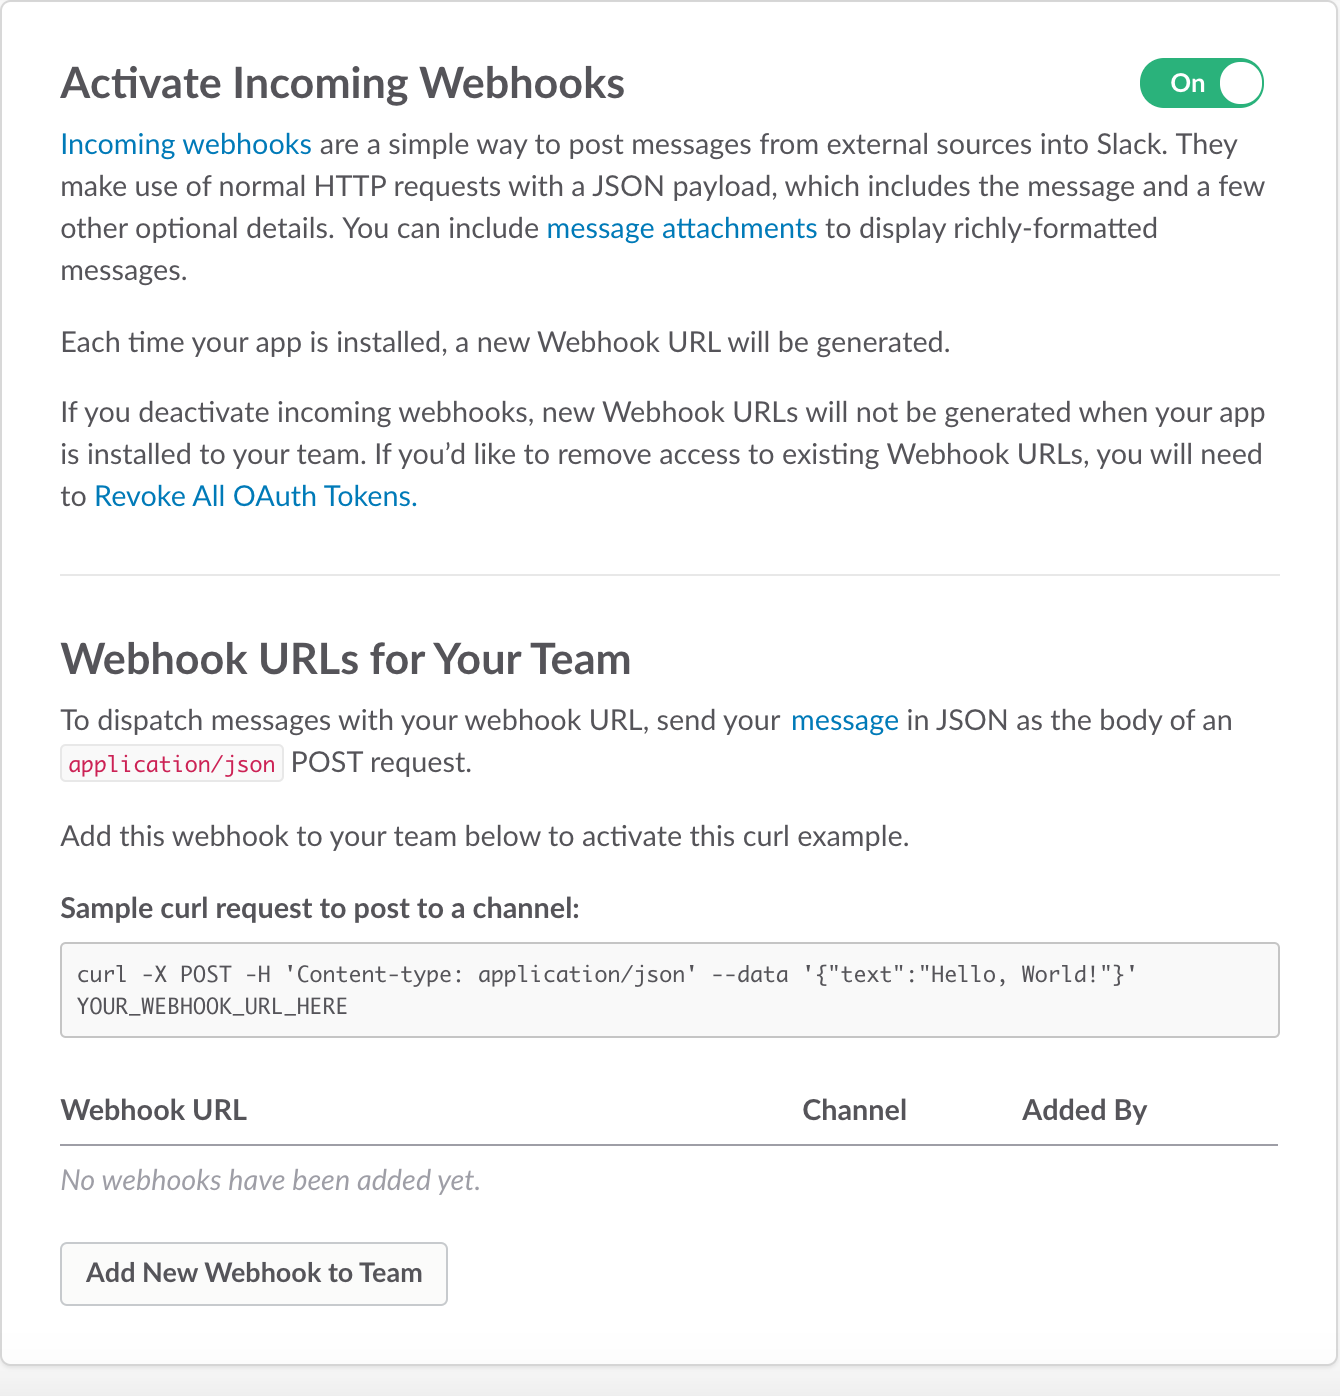 Activate Incoming Webhooks Page